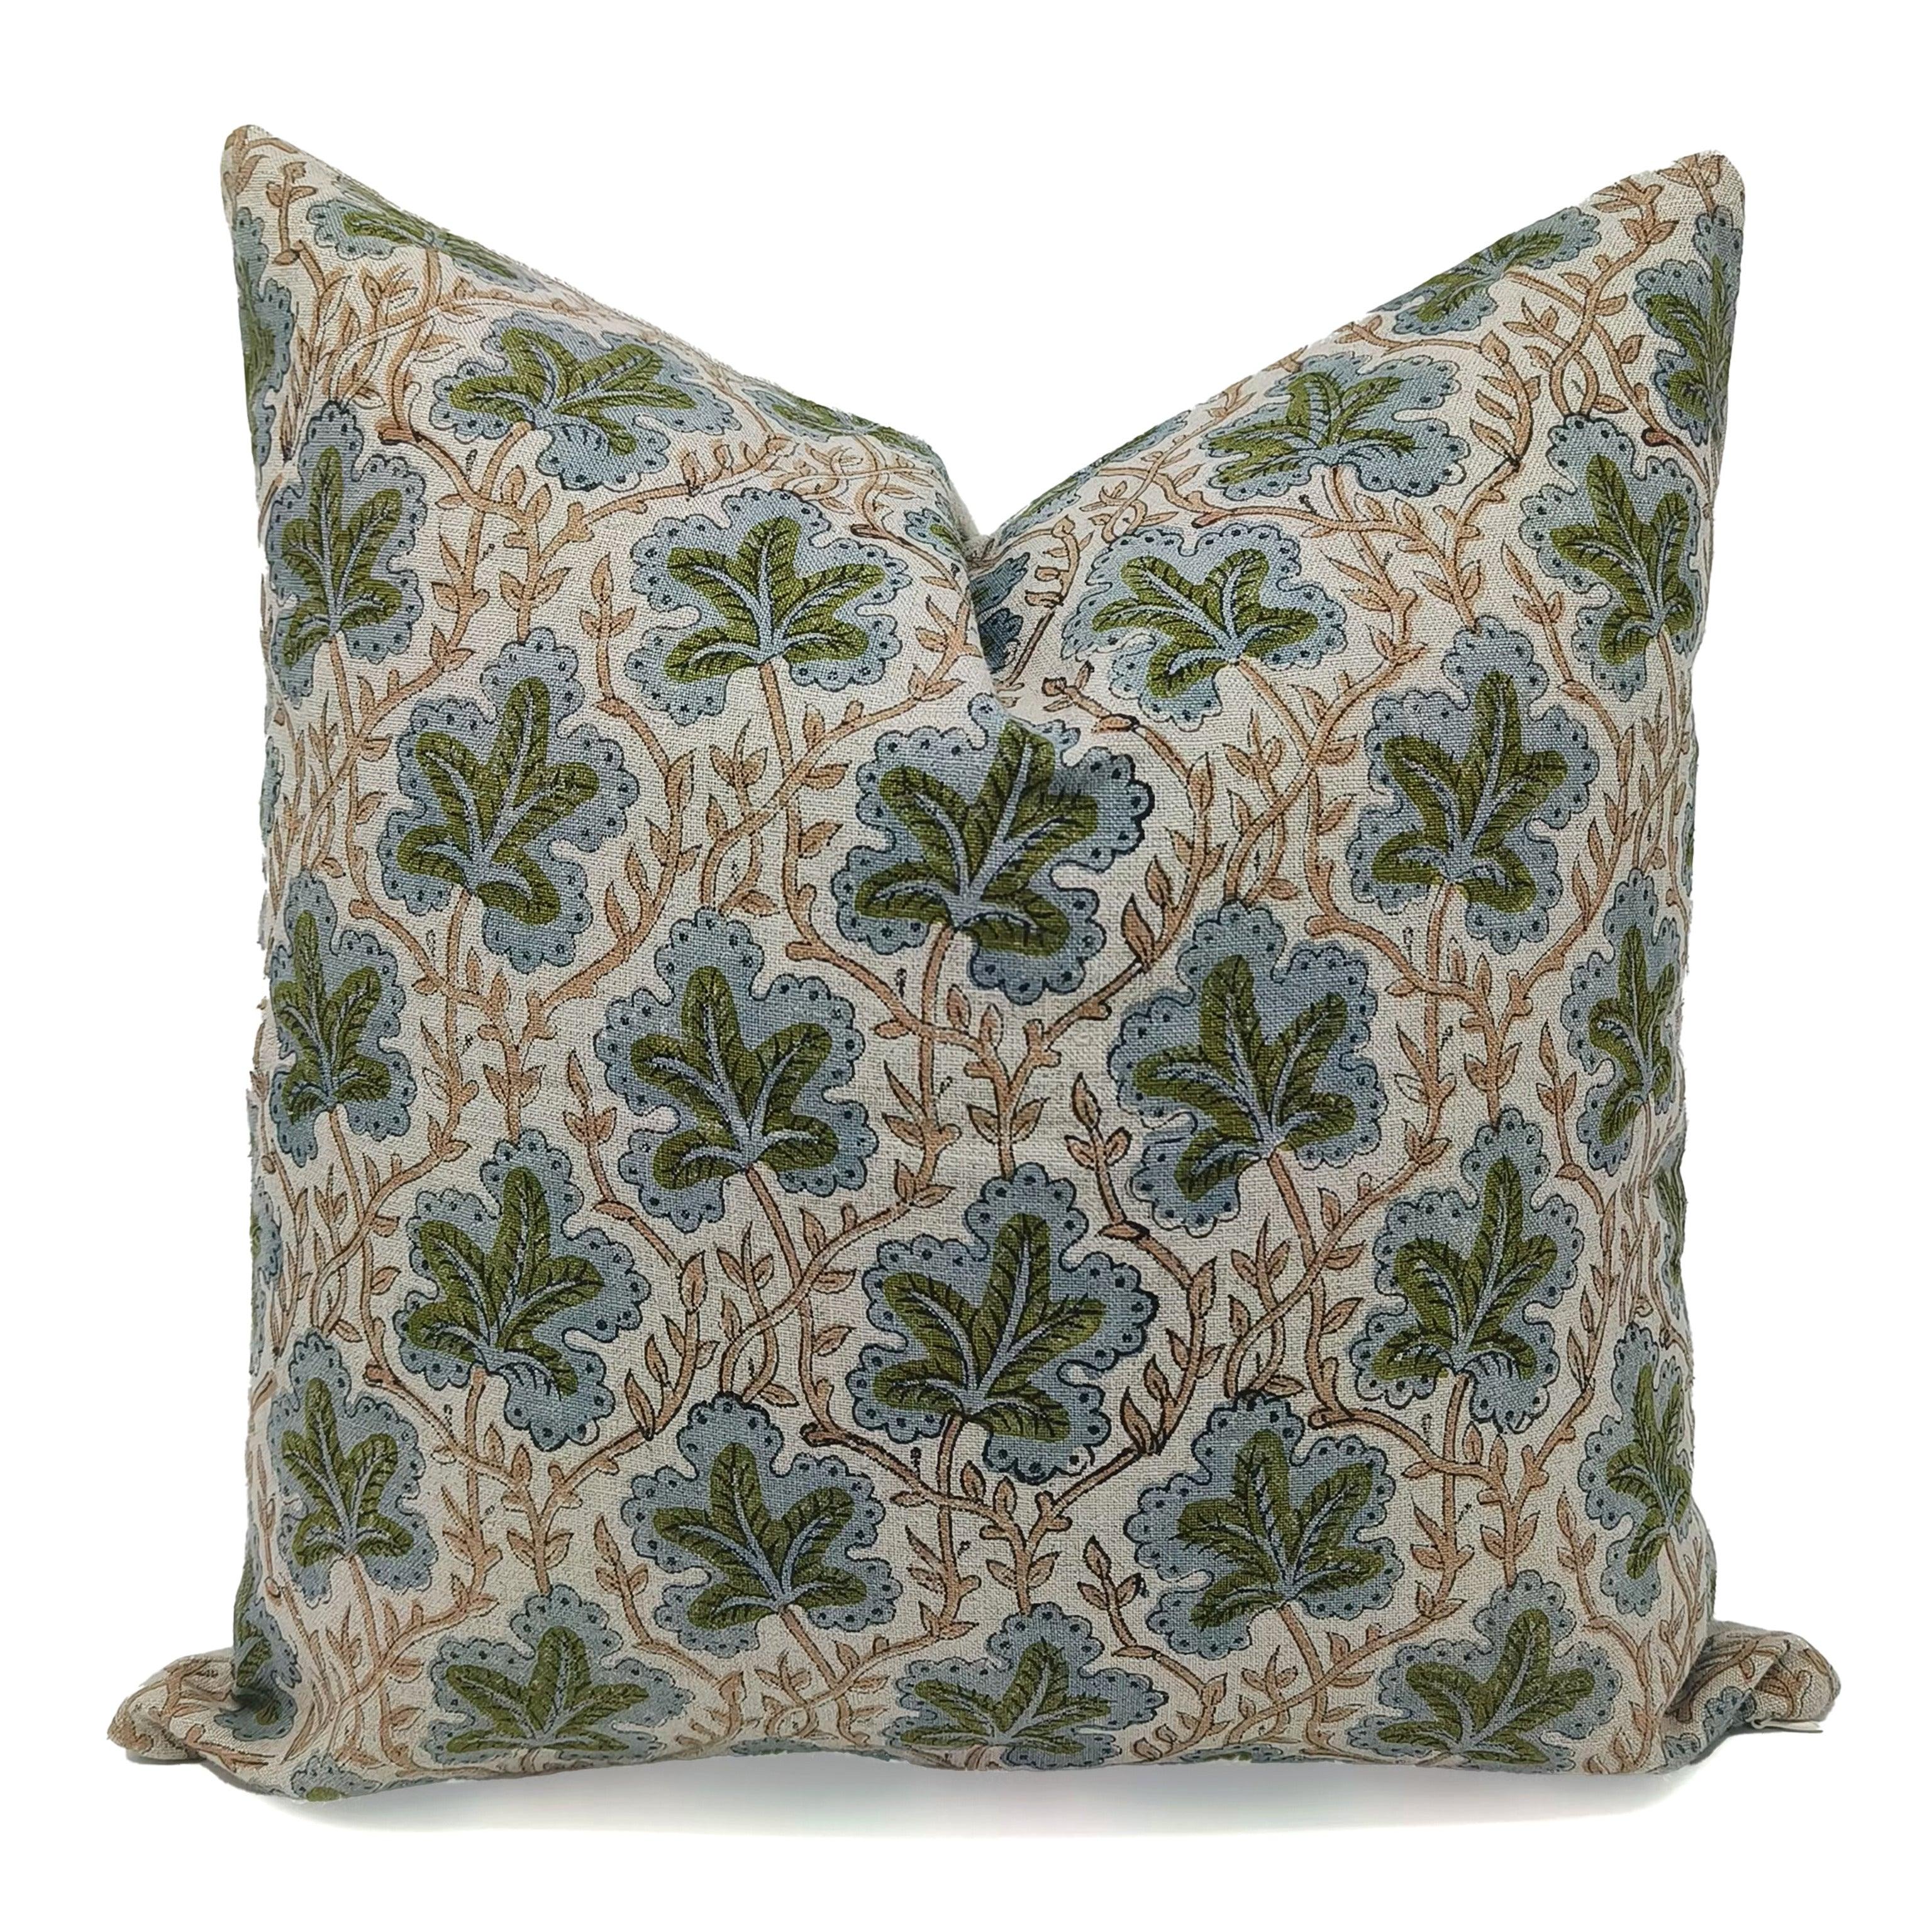 Block print Linen Pillow cover, Handblock cushion cover, decorative pillow cover, throw pillow, set two covers, outdoor sofa cushion, case king decorative covers, boho large small, bed farmhouse square, vintage neutral accent, floral bedroom décor lumbar, block print living room cushions, handmade hand block pillow, bohemian